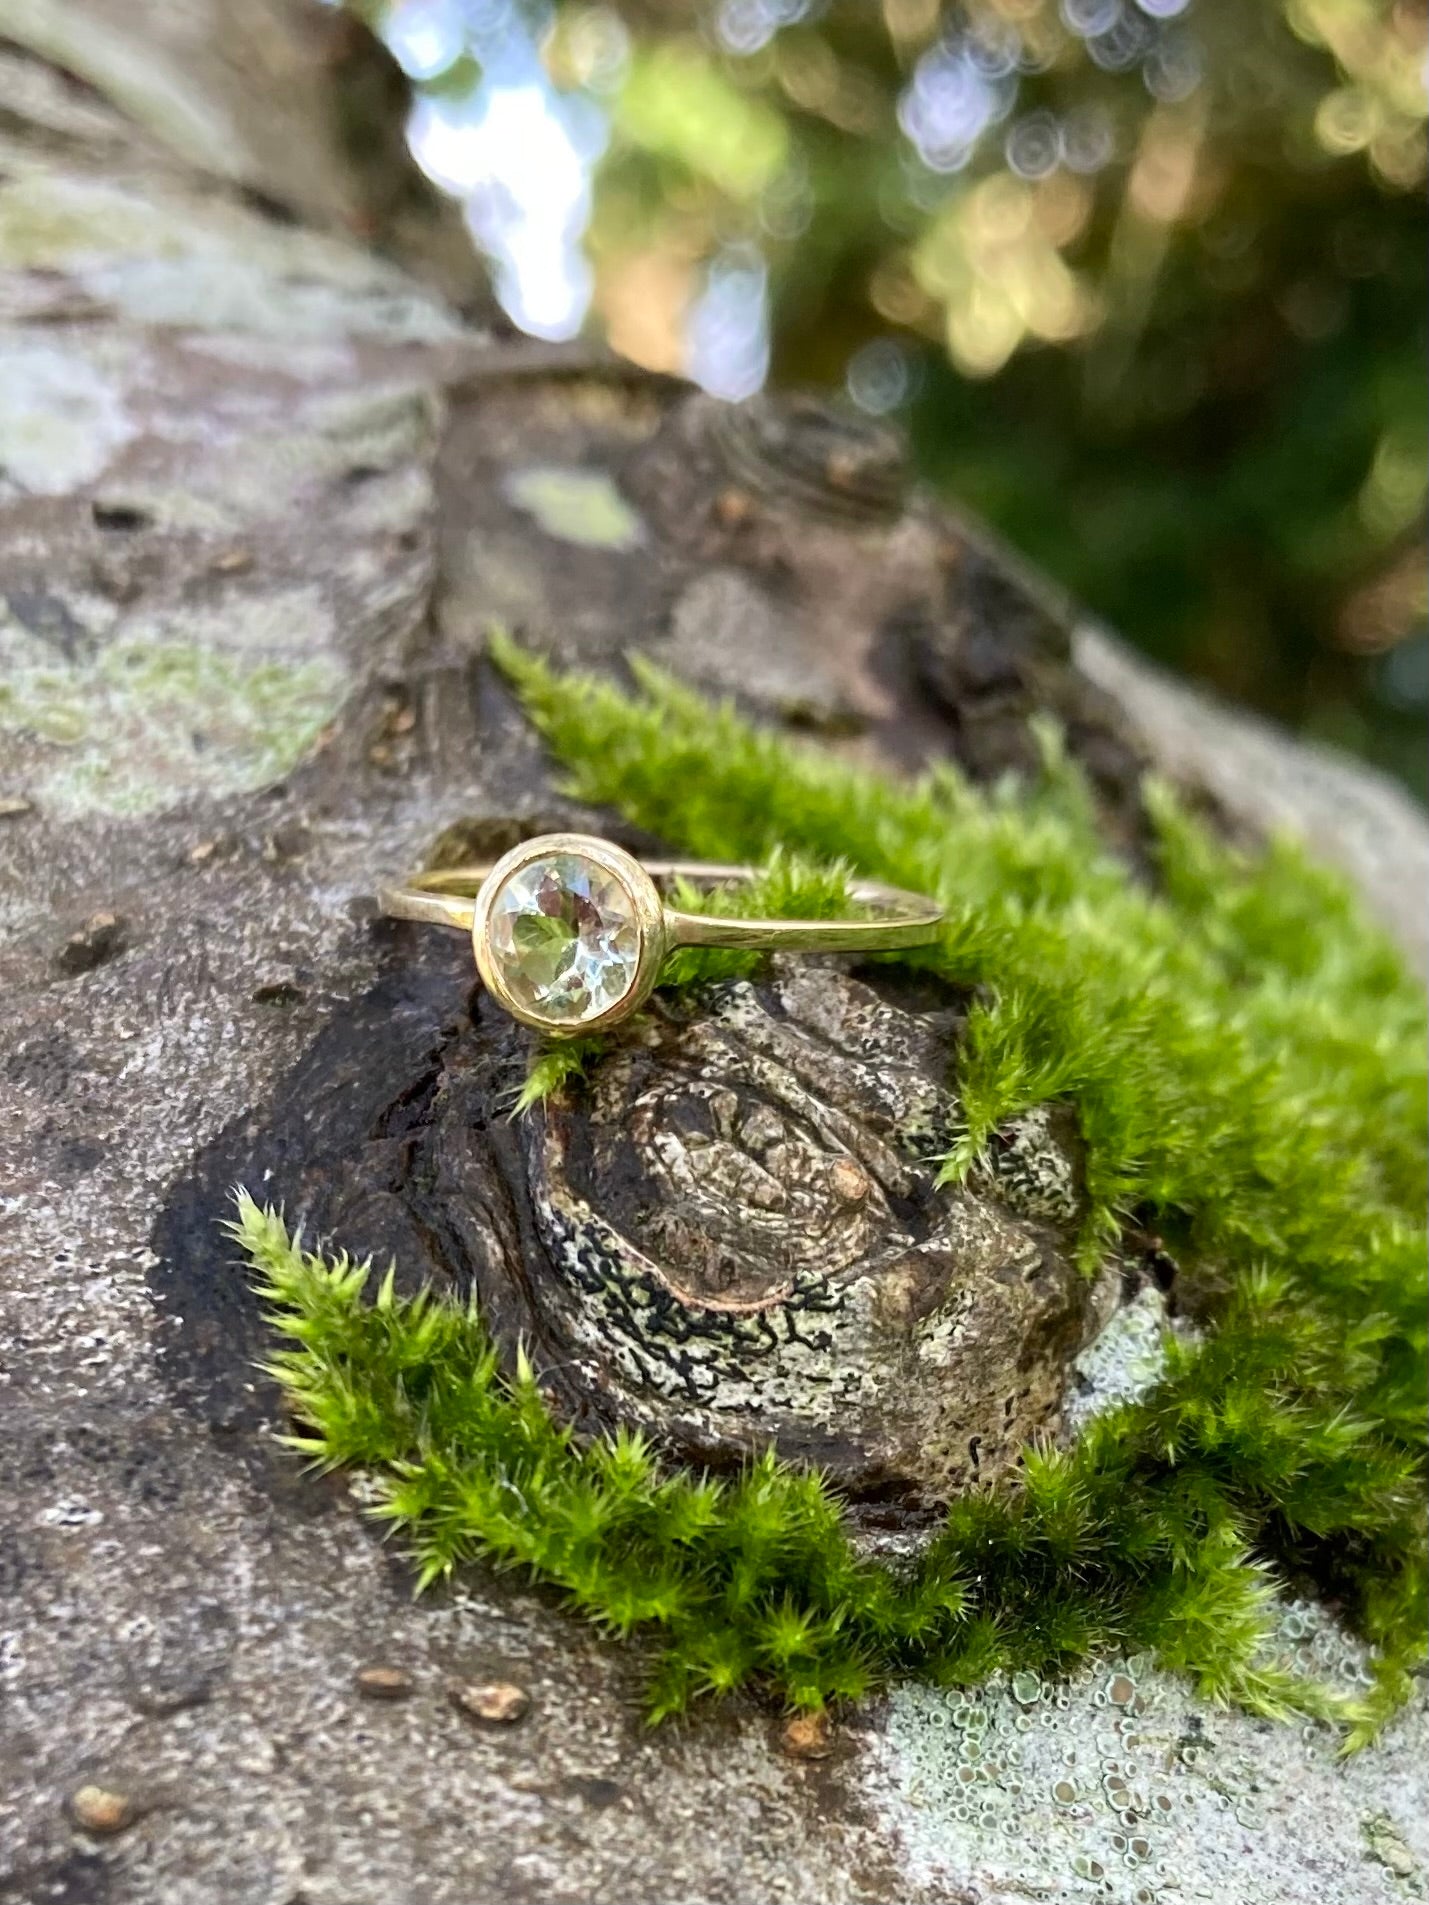 18ct yellow gold slim band ring set with round pale green beryl in rub over setting, on mossy tree